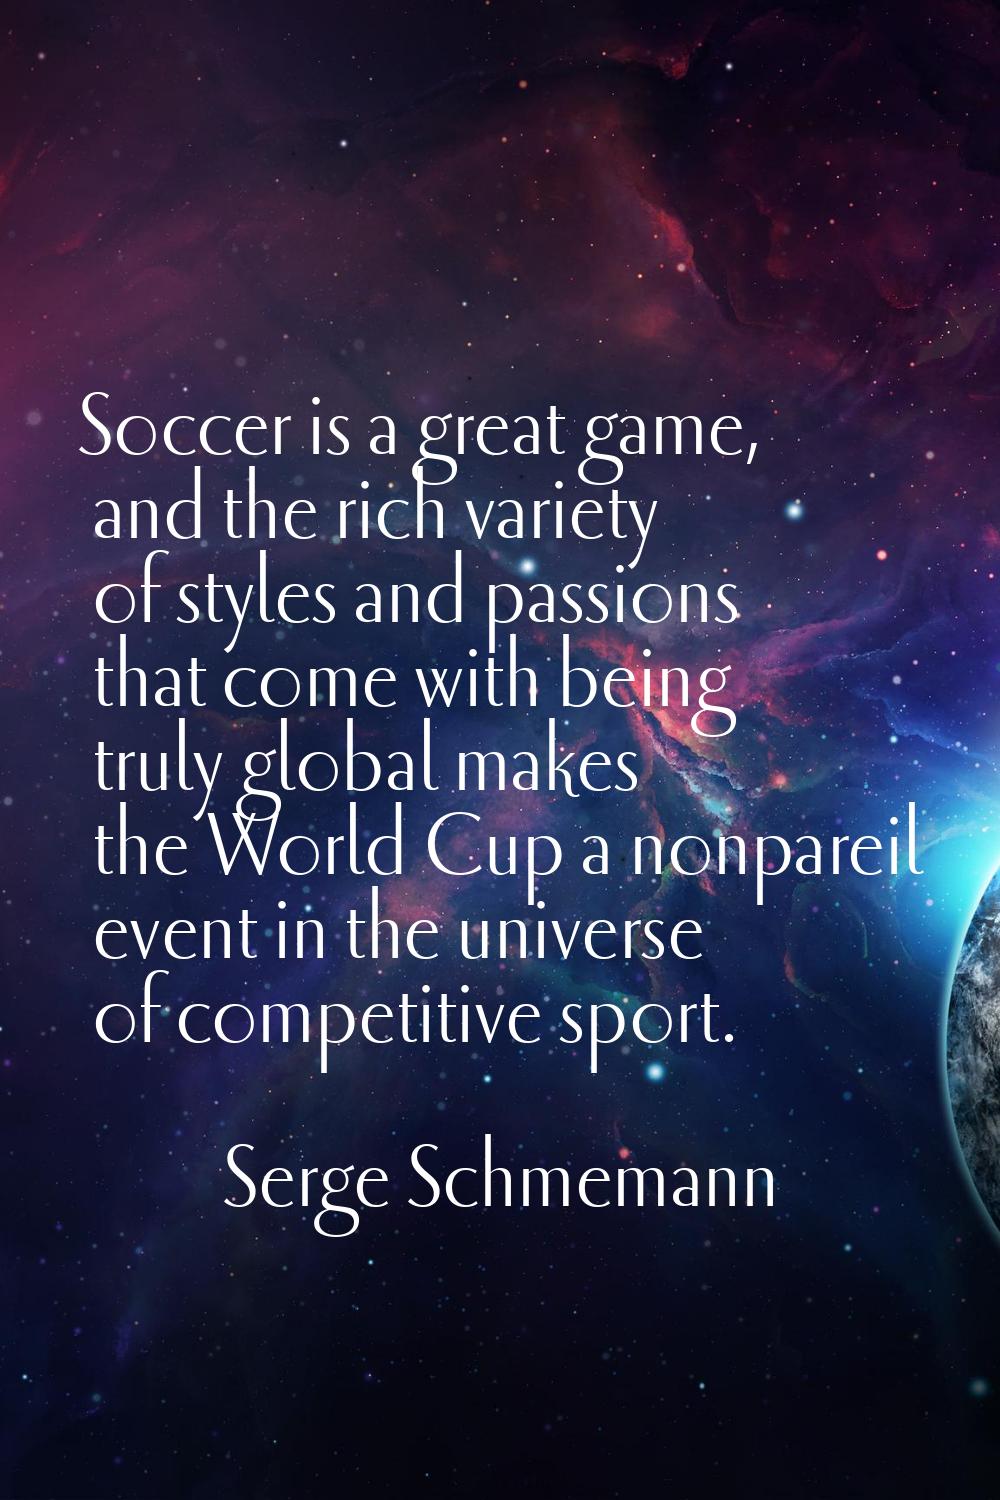 Soccer is a great game, and the rich variety of styles and passions that come with being truly glob